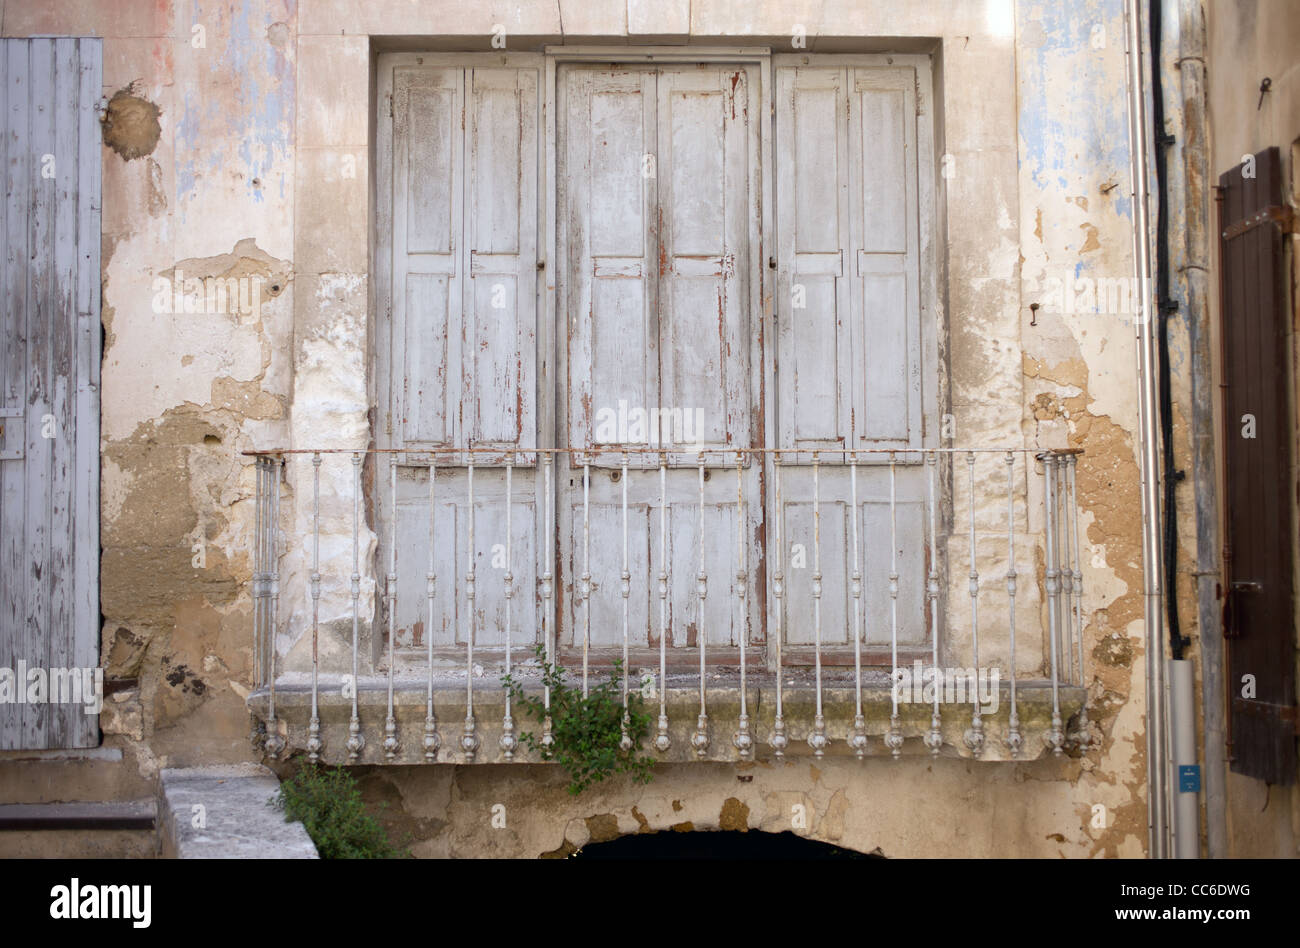 Three old wooden doors open up to a metal balcony railing in Menerbes, France Stock Photo